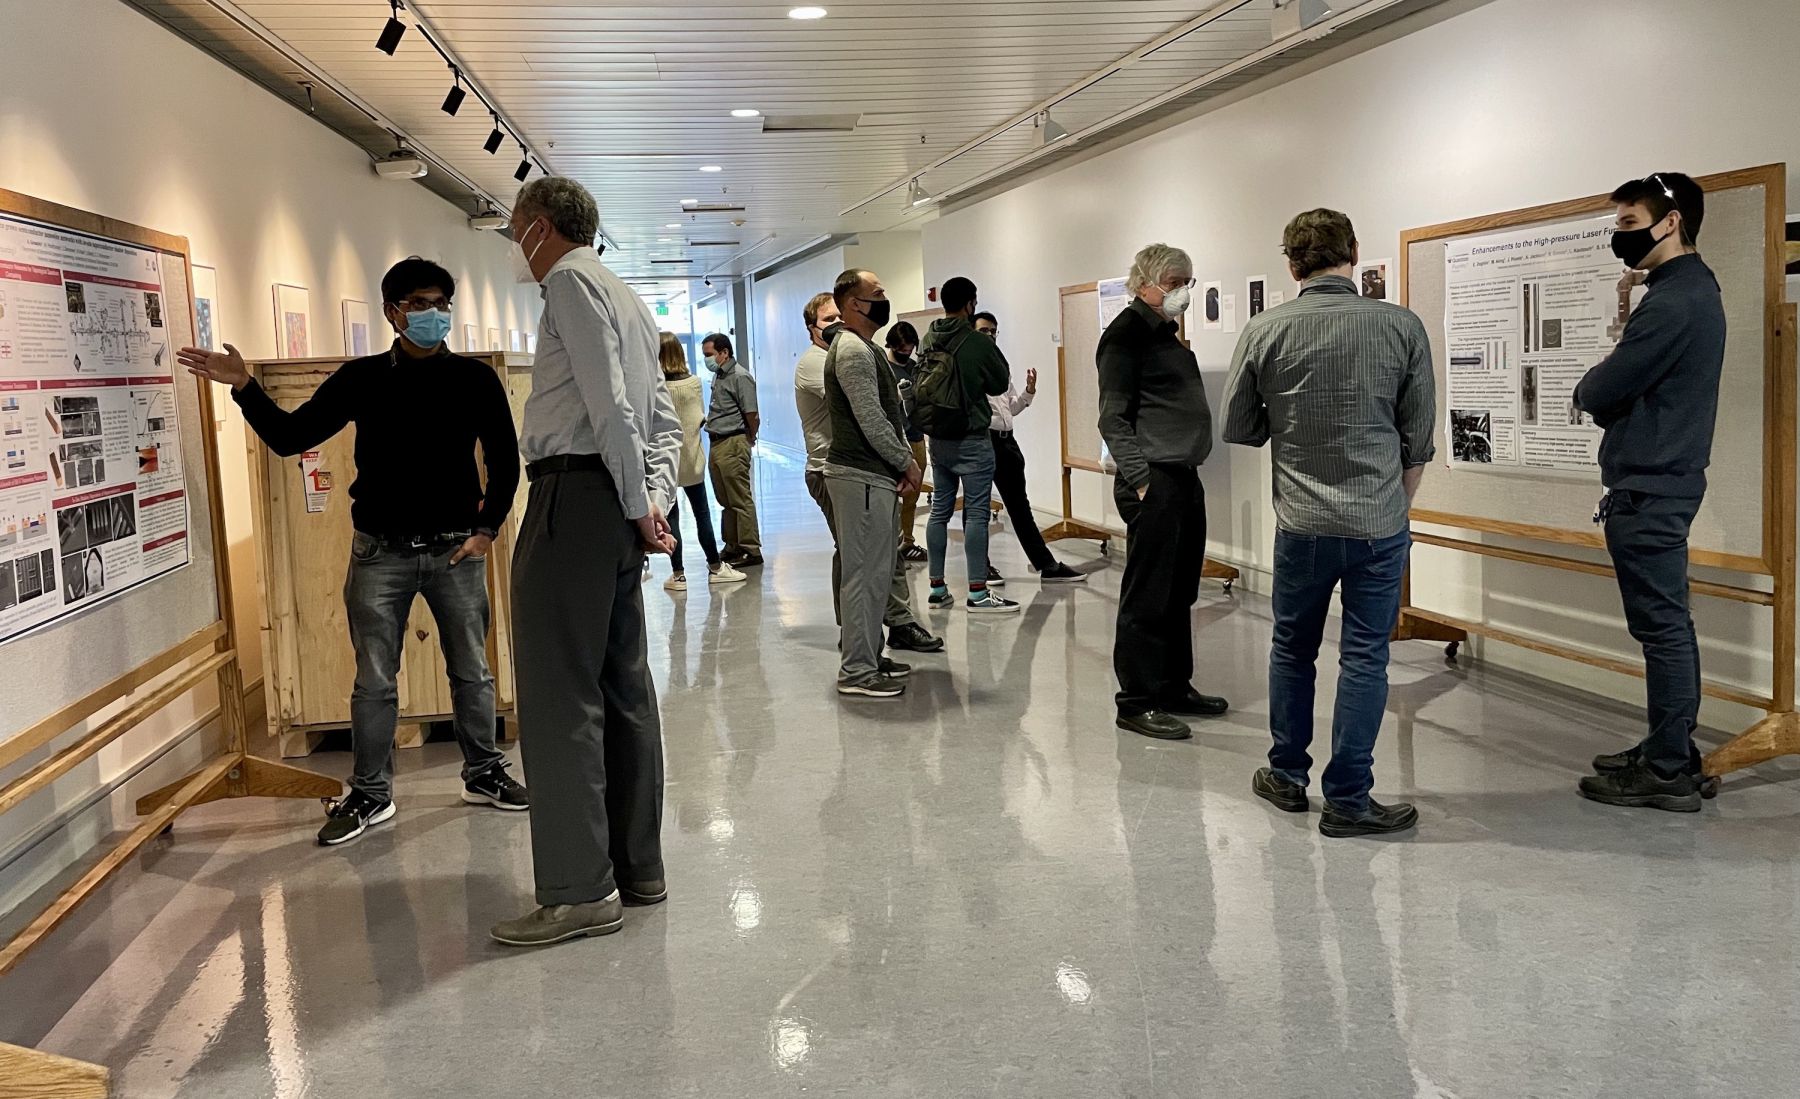 UCSB and MonArk Quantum Foundries Poster Session